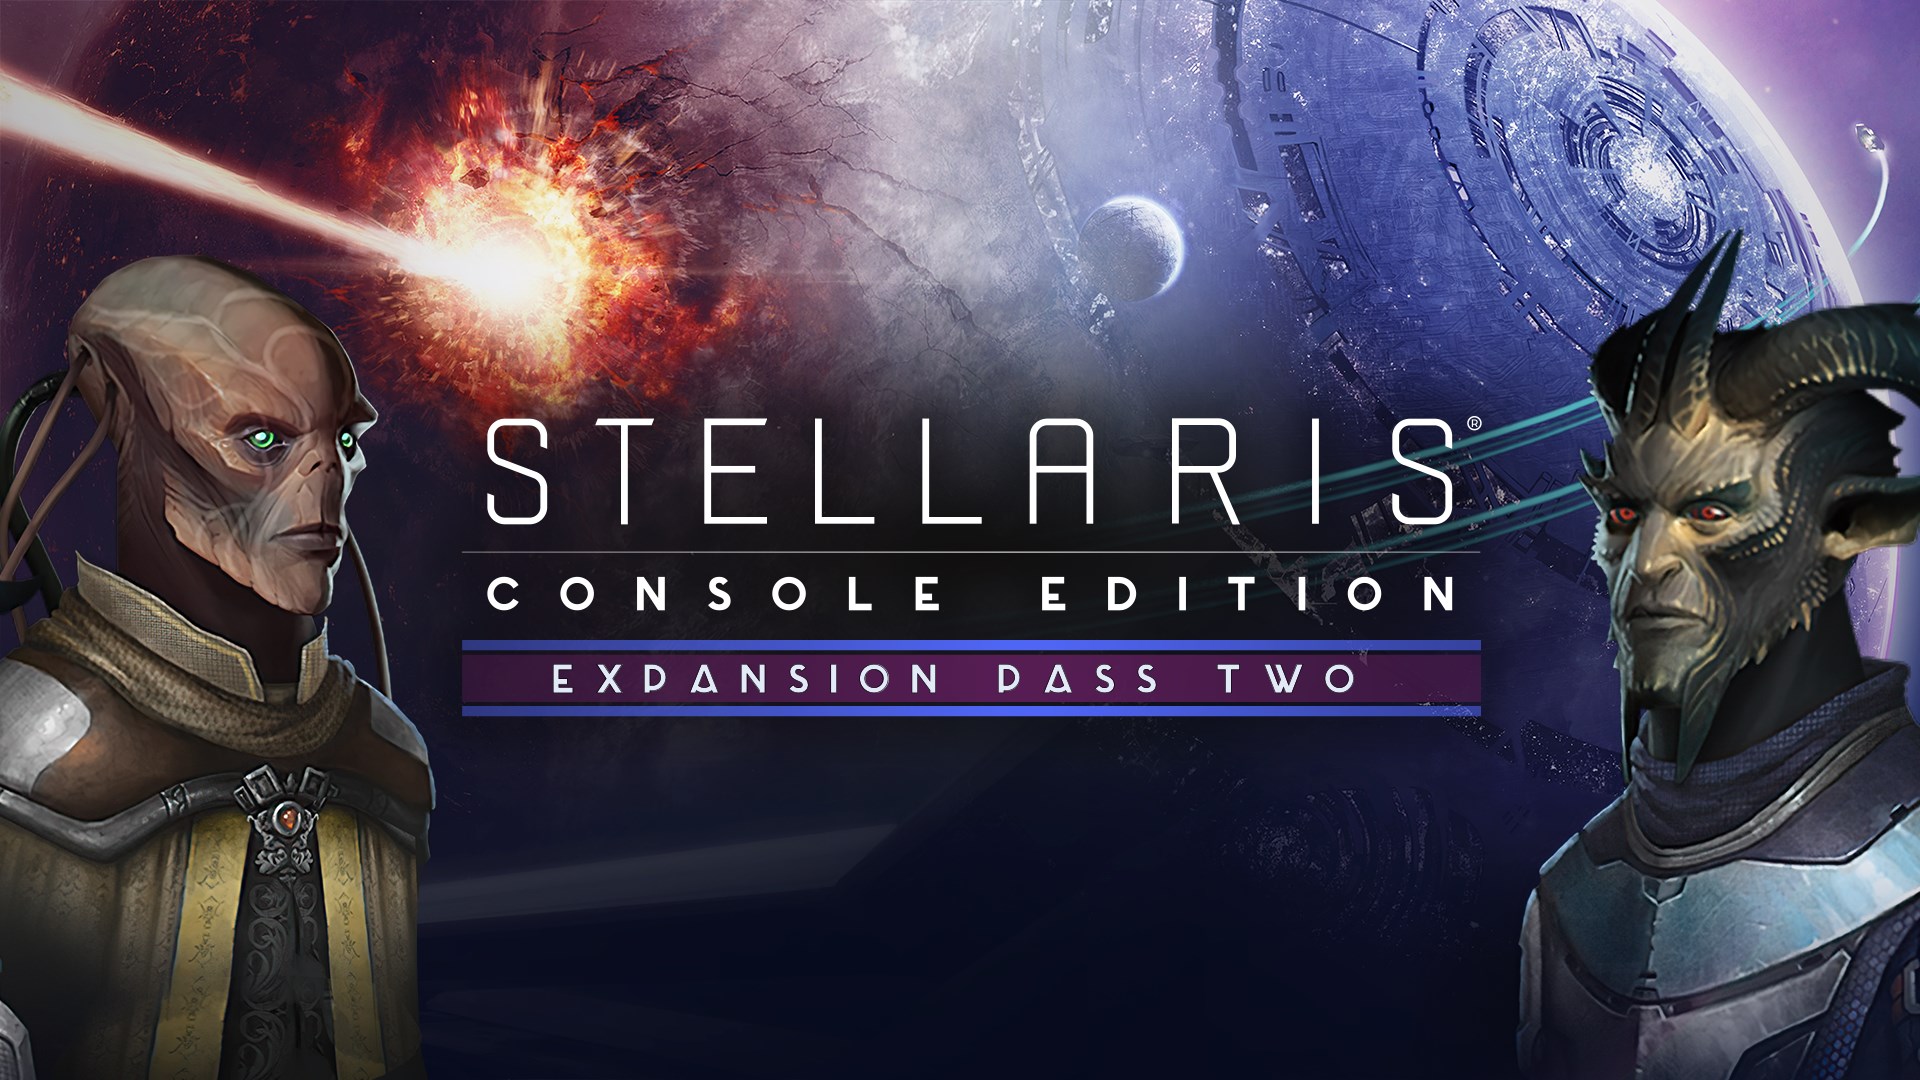 Stellaris Console Edition - Expansion Pass Two